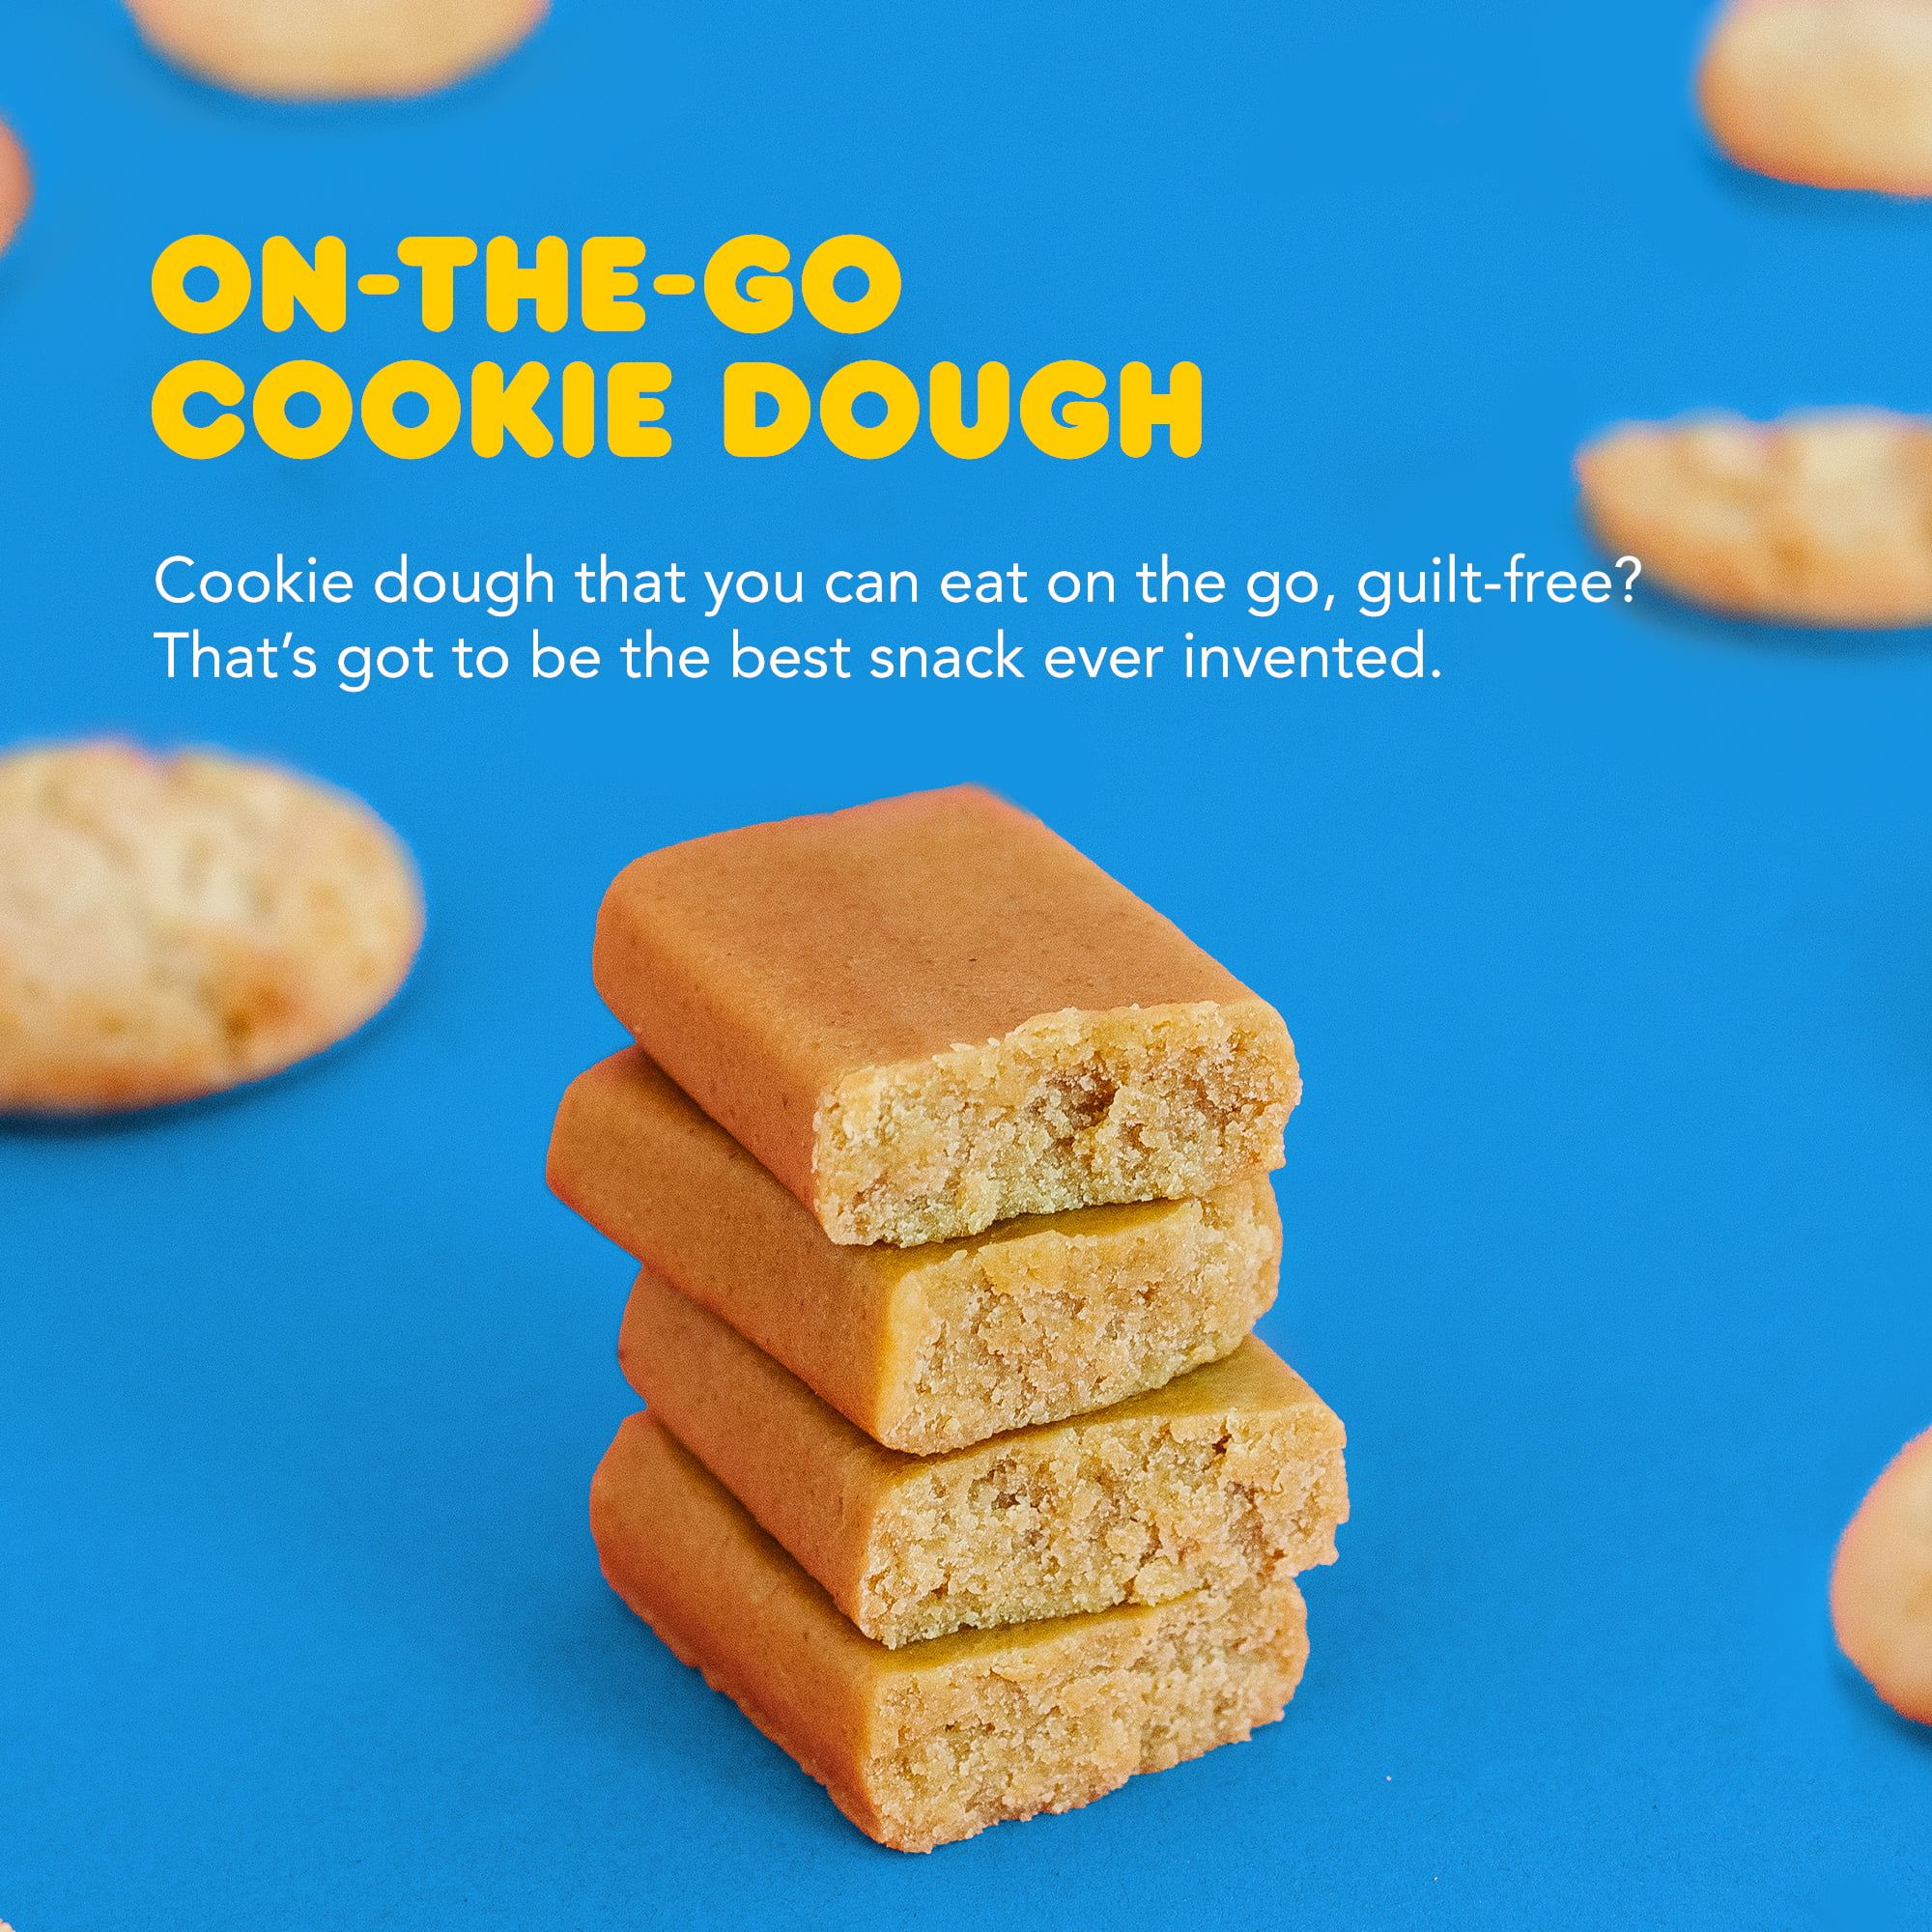 American Airlines to offer Woah Dough cookie bars on domestic